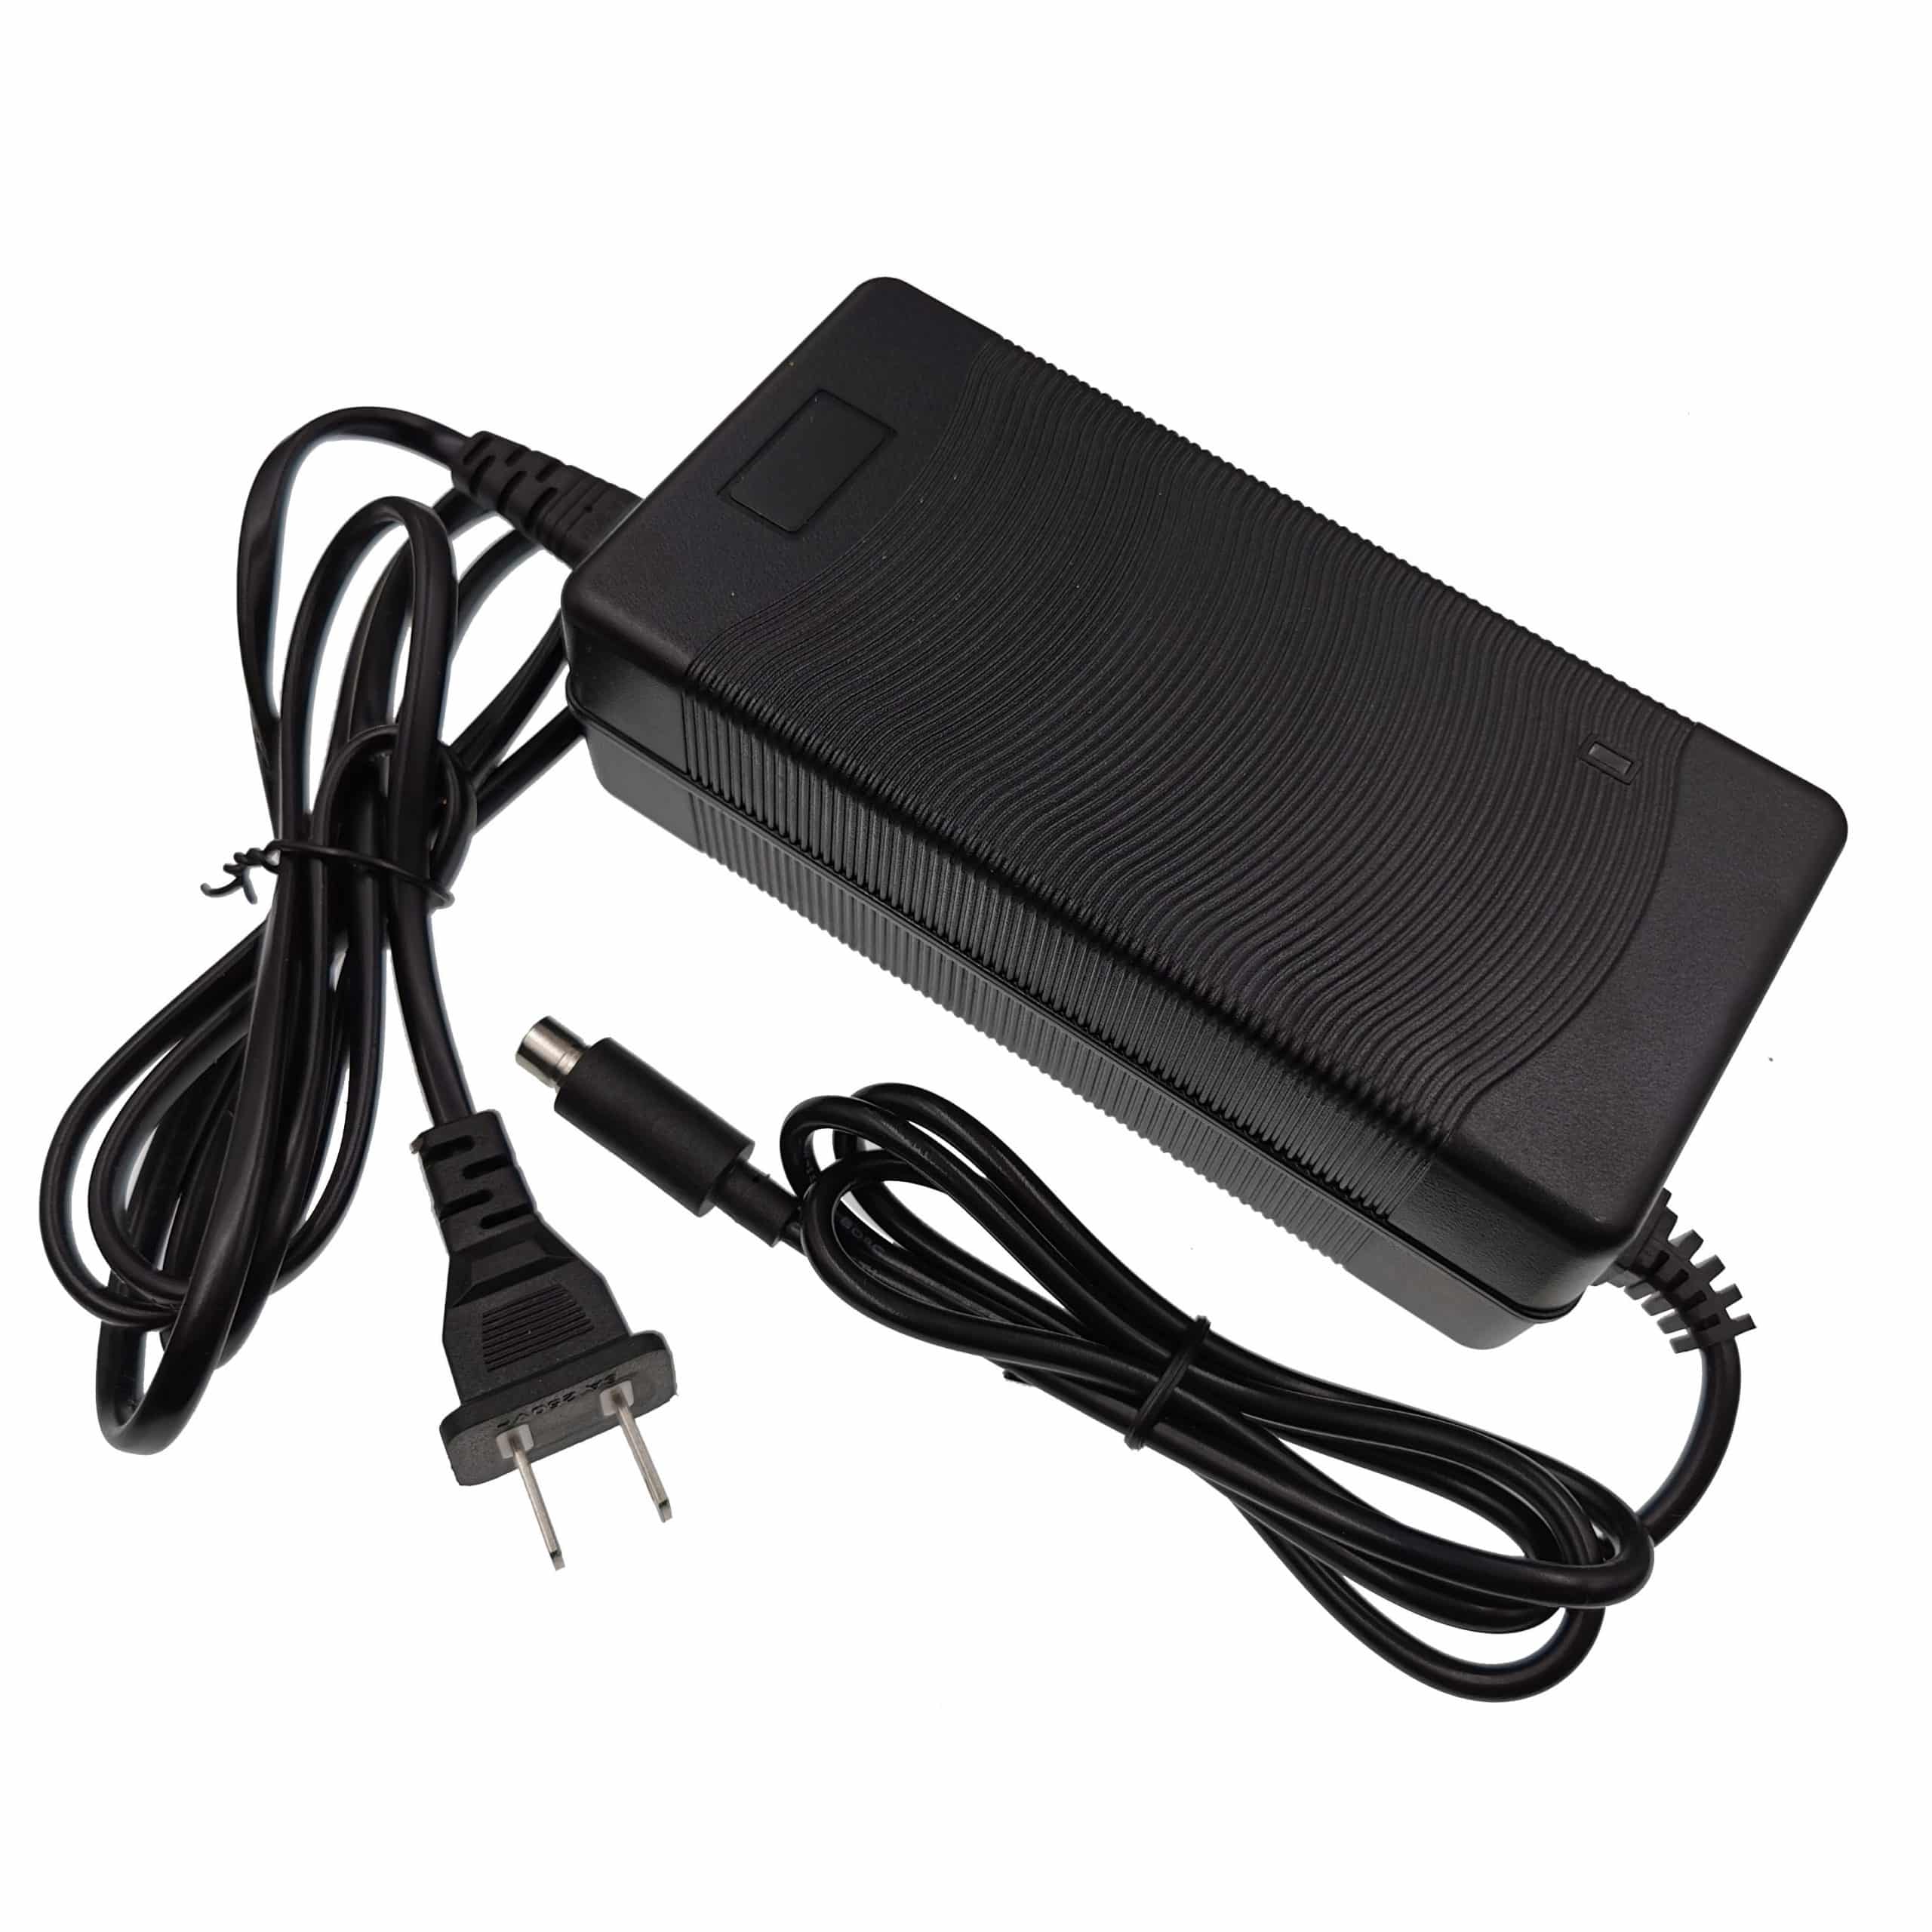 54.6V Li - Ion Electric Bicycle Charger